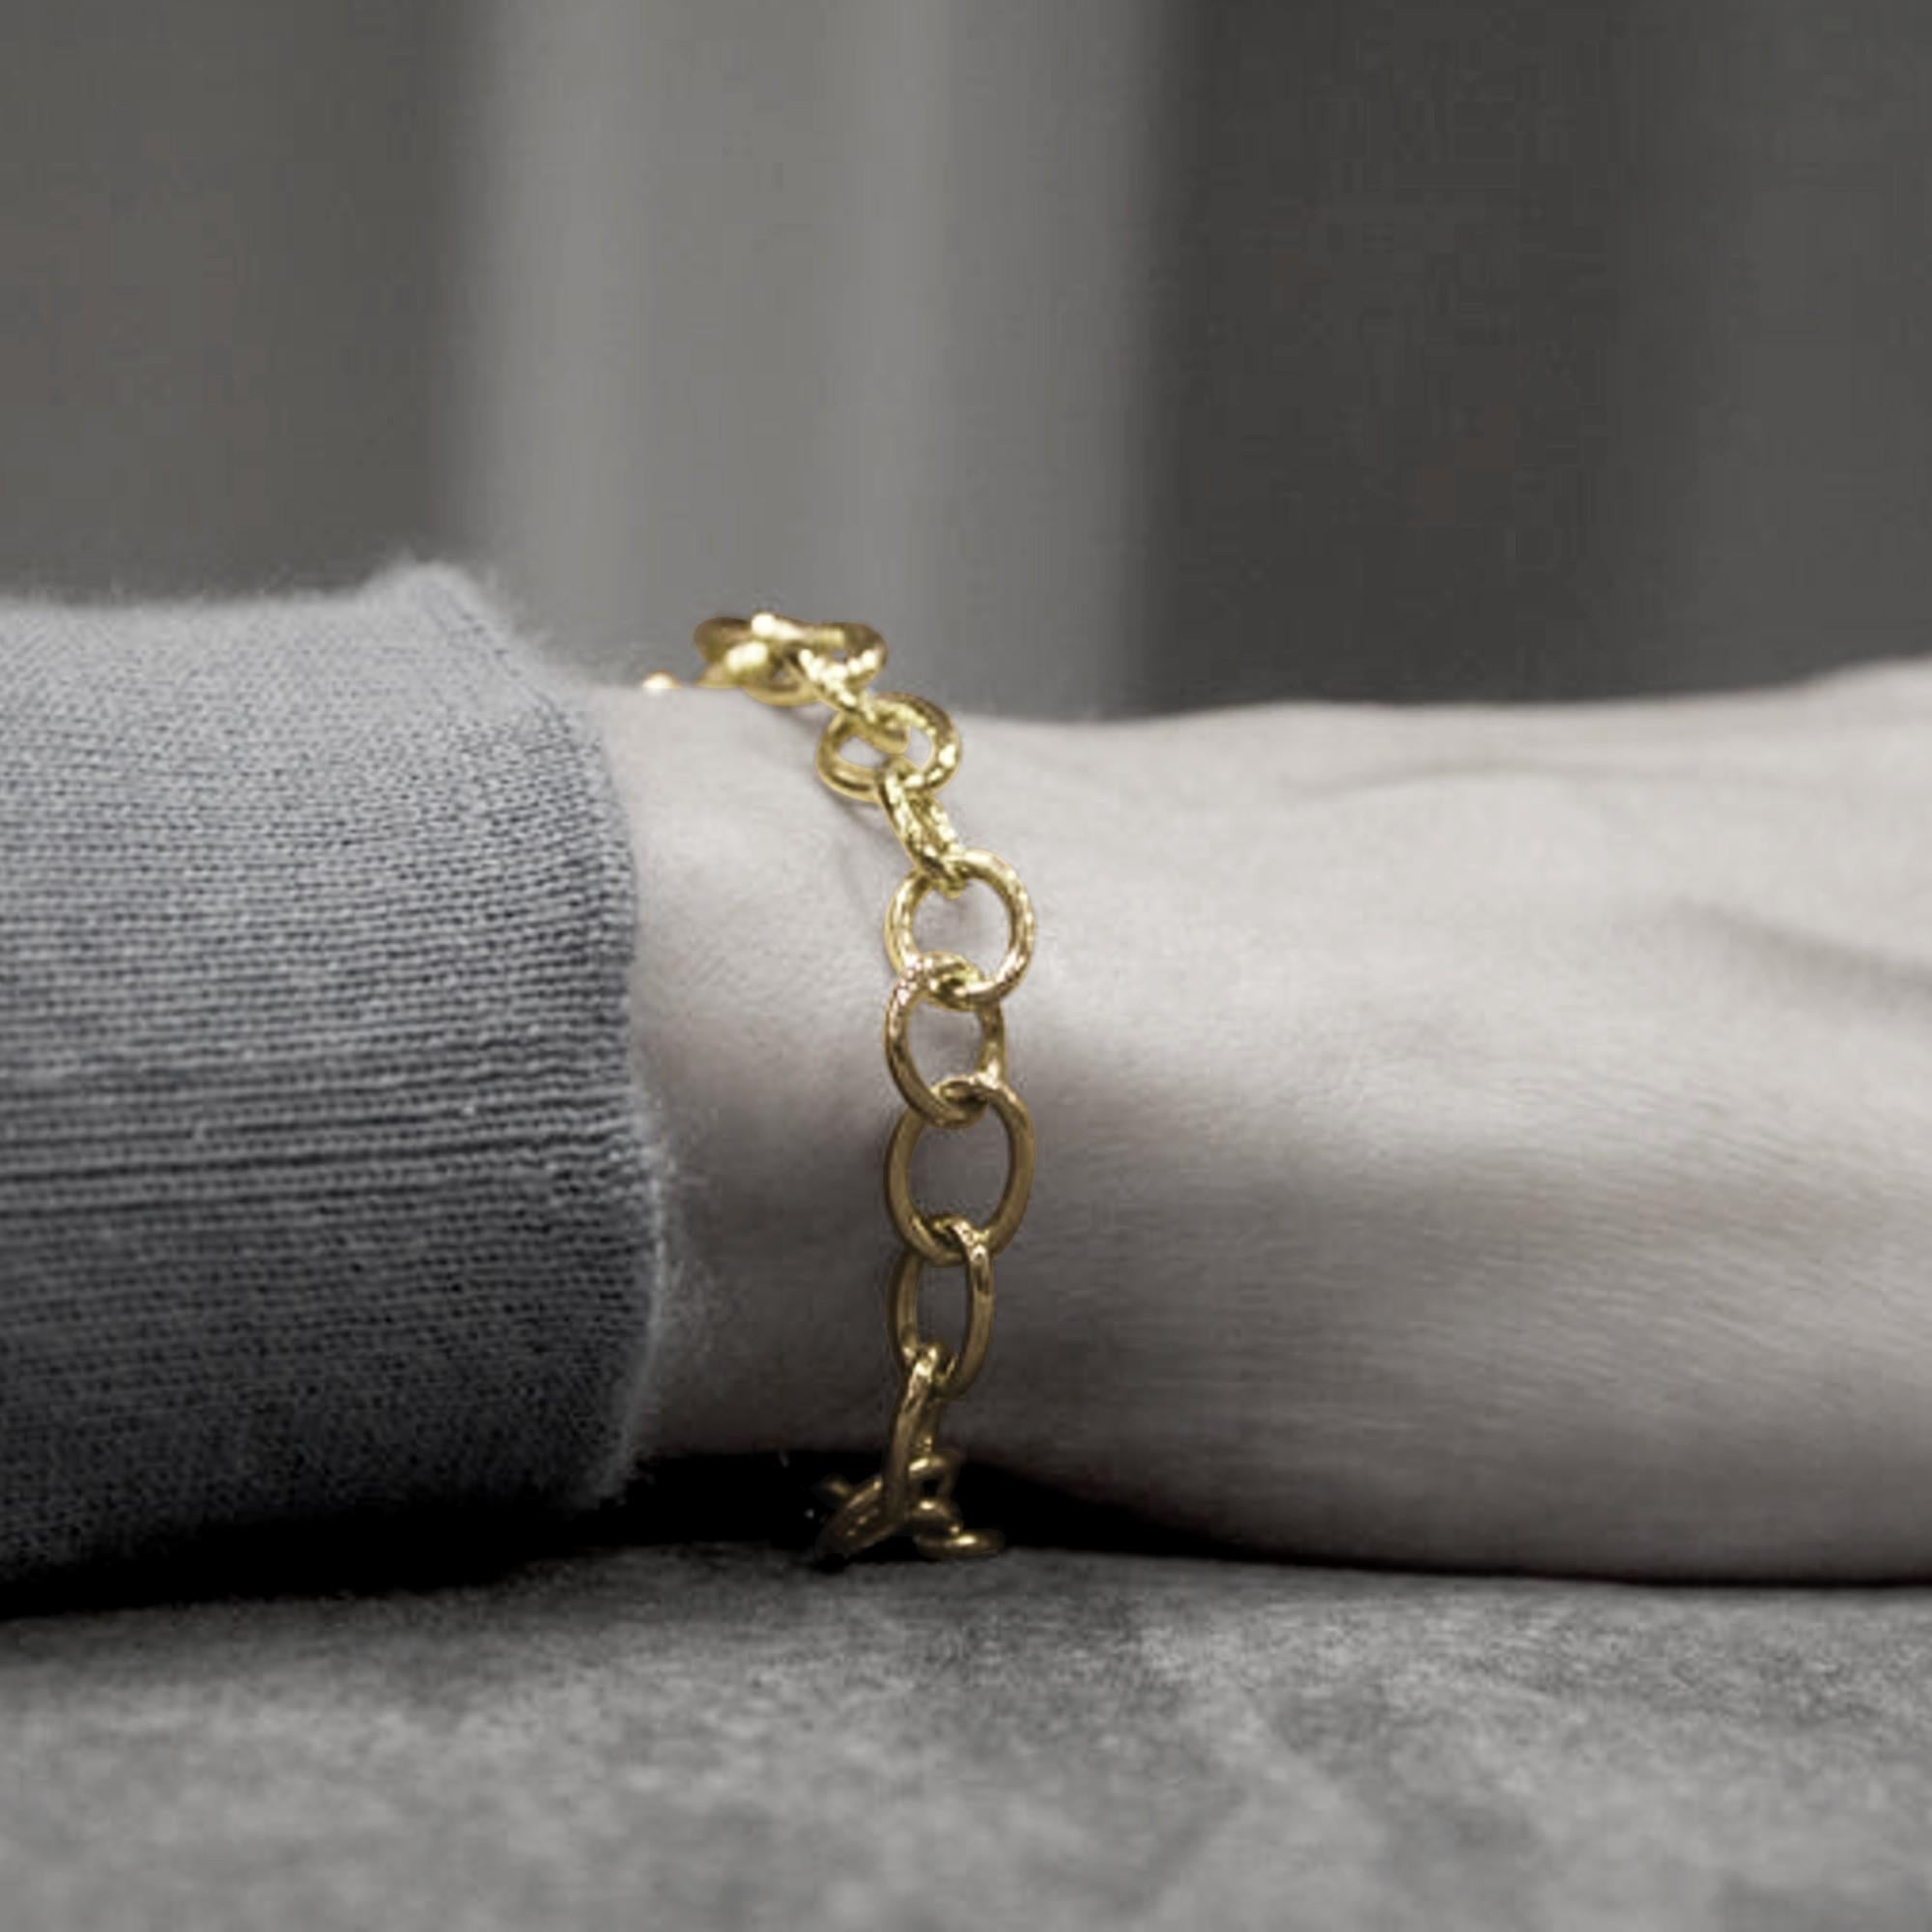 Alex Jona design collection, hand crafted in Italy, 18 karat yellow gold chain bracelet.
Dimension : L 7.68 in X W 0.29 in
L 19.5 cm X W 7.36 mm
Weight 7.6 gr

Alex Jona jewels stand out, not only for their special design and for the excellent